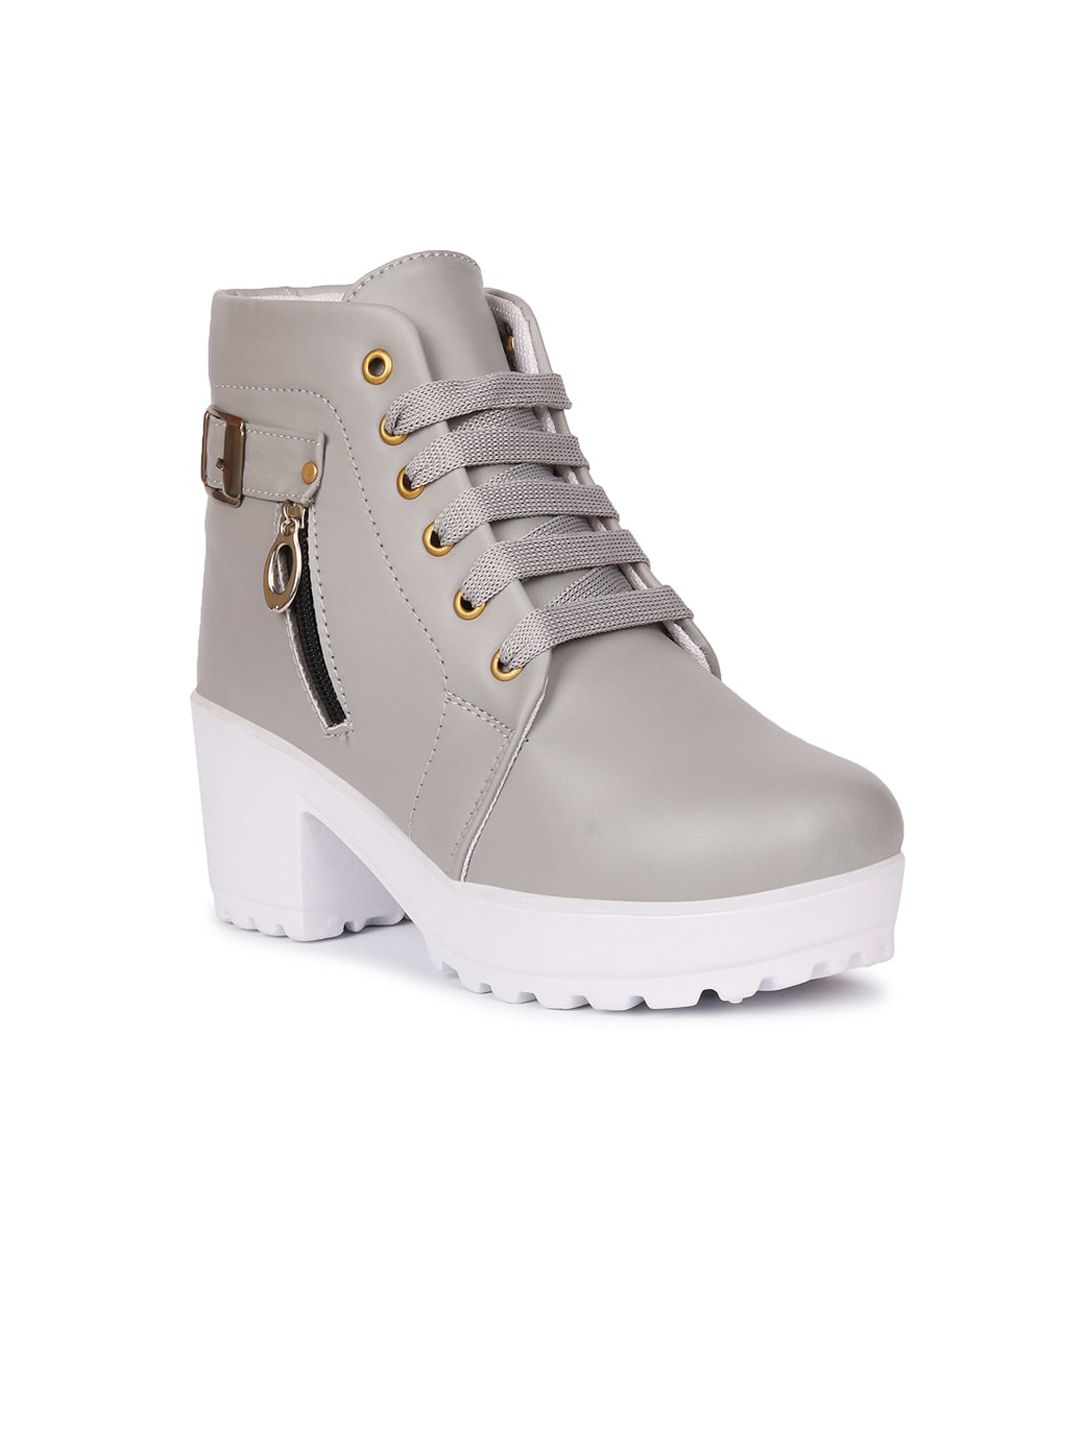 Longwalk Grey PU Platform Heeled Boots with Buckles Price in India